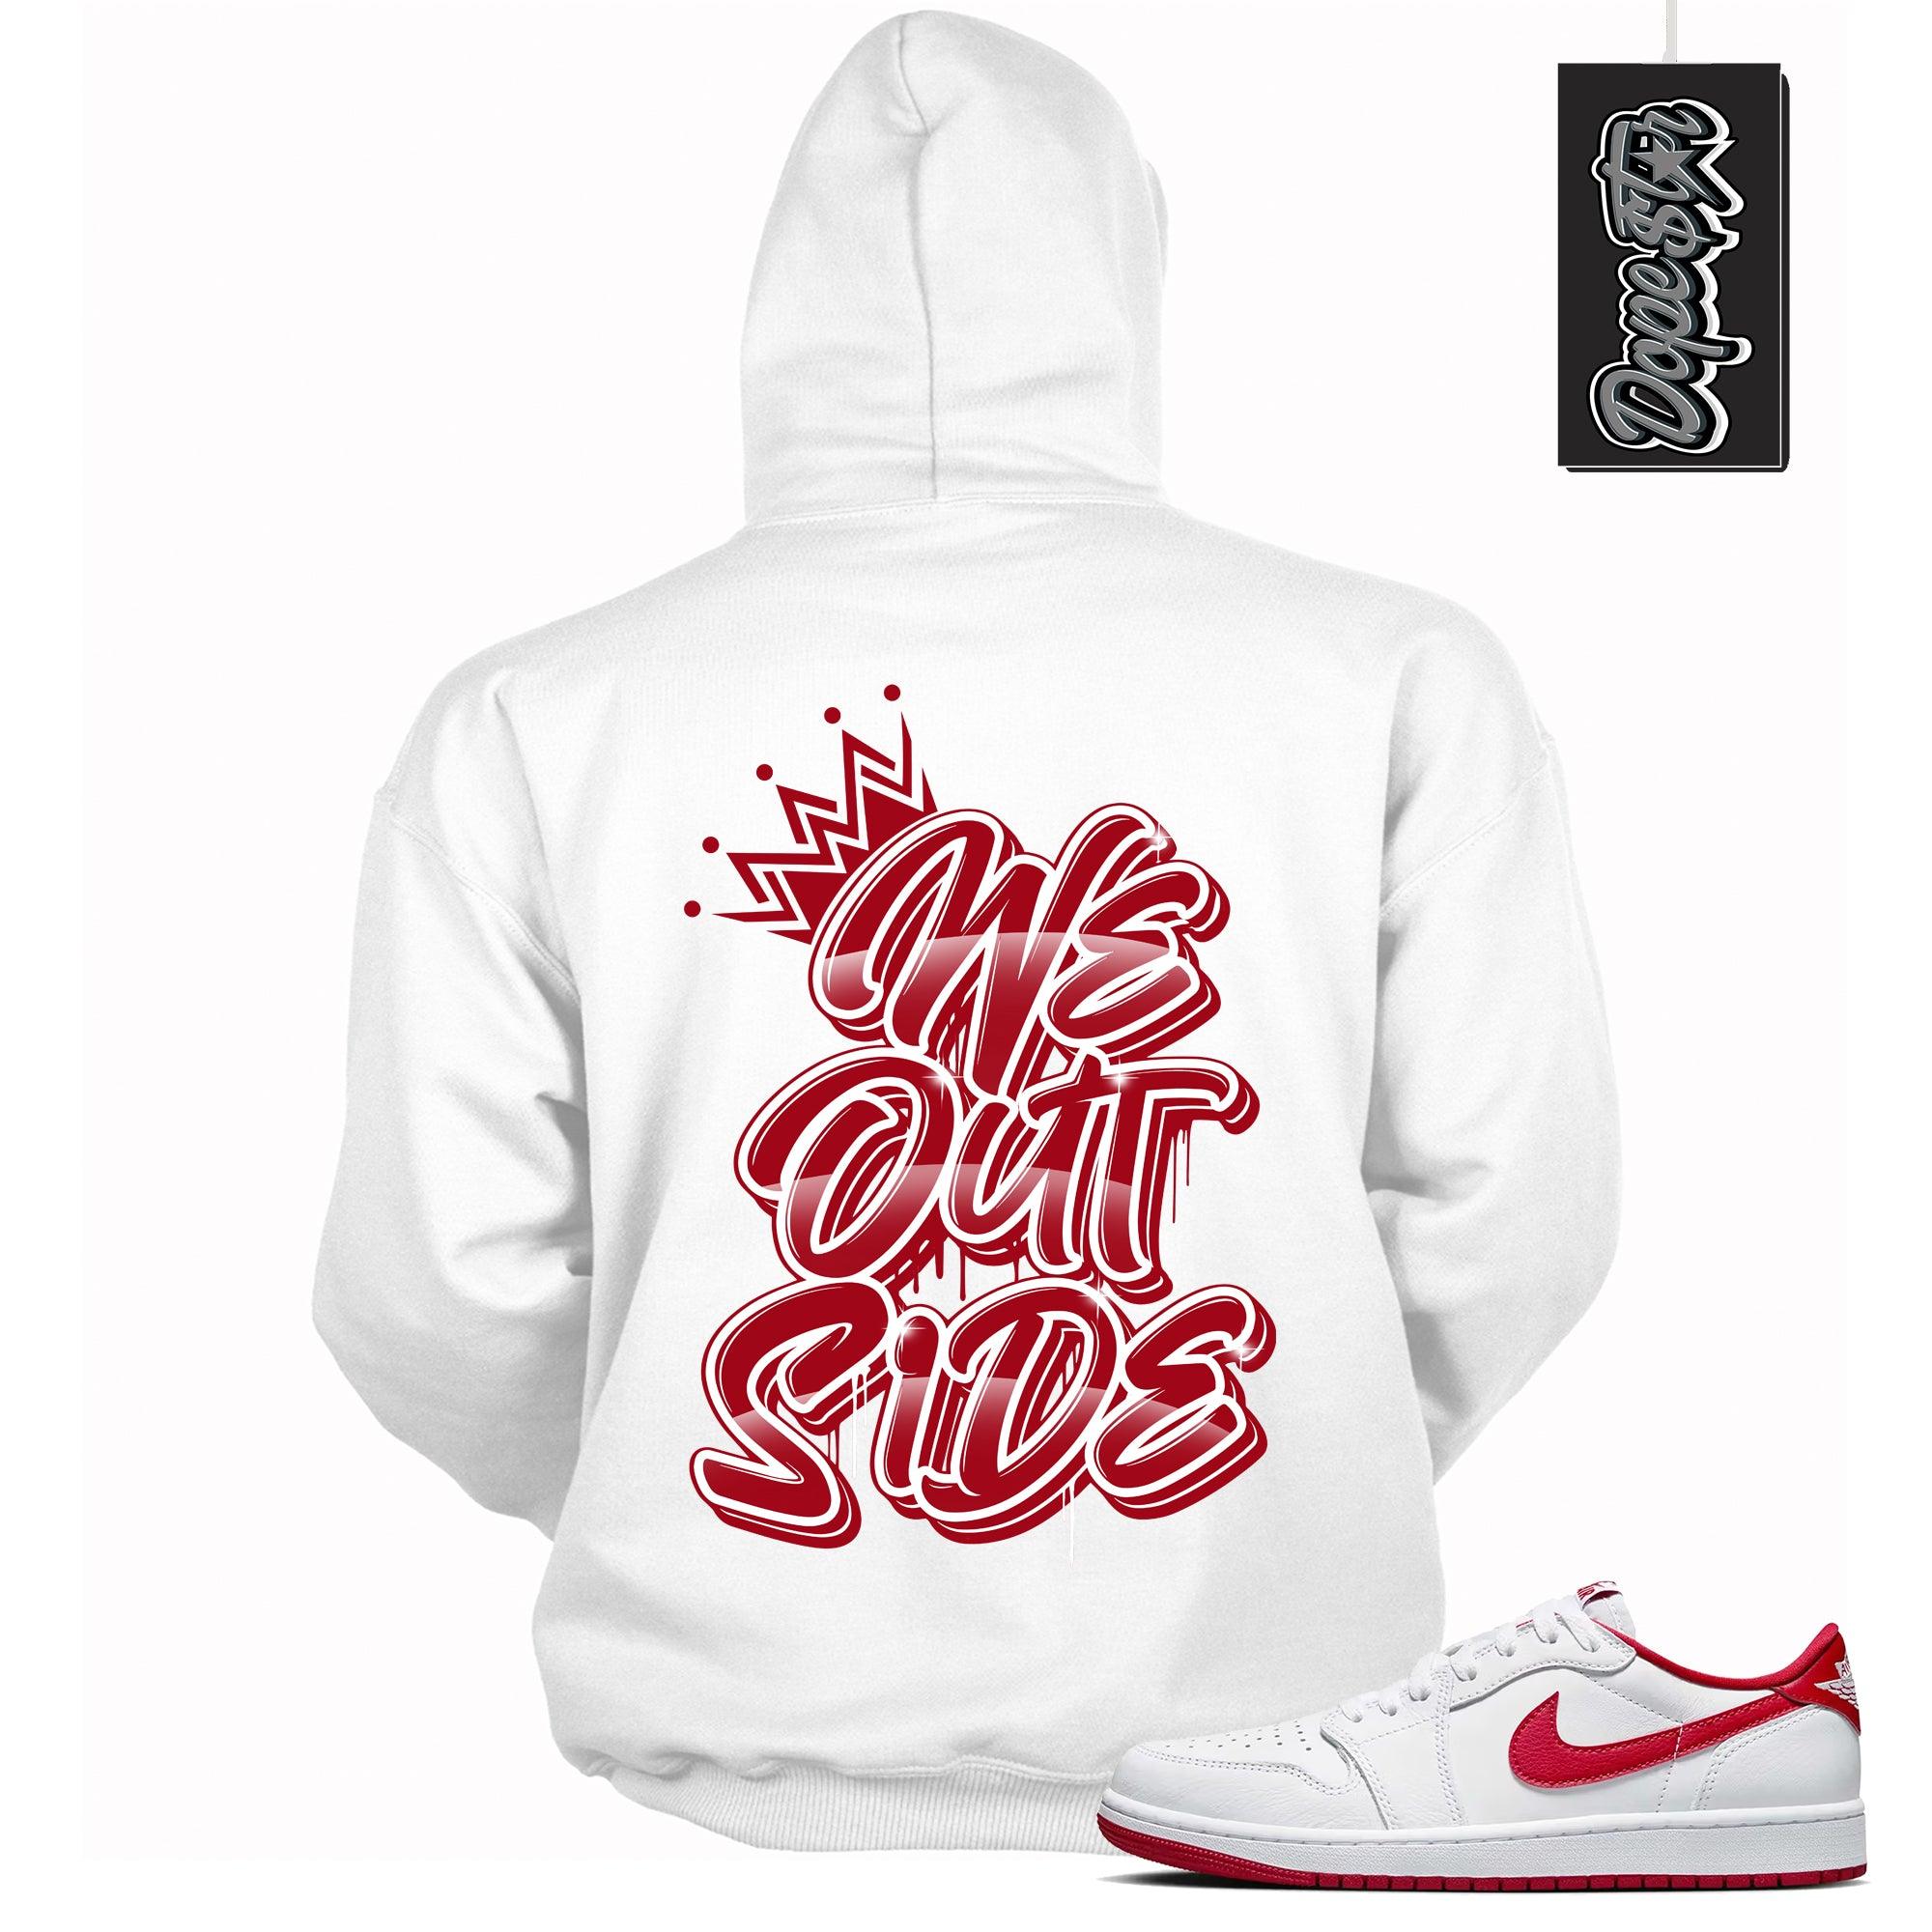 Cool White Graphic Hoodie with “ WE OUTSIDE “ print, that perfectly matches Air Jordan 1 Retro Low OG University Red and white sneakers